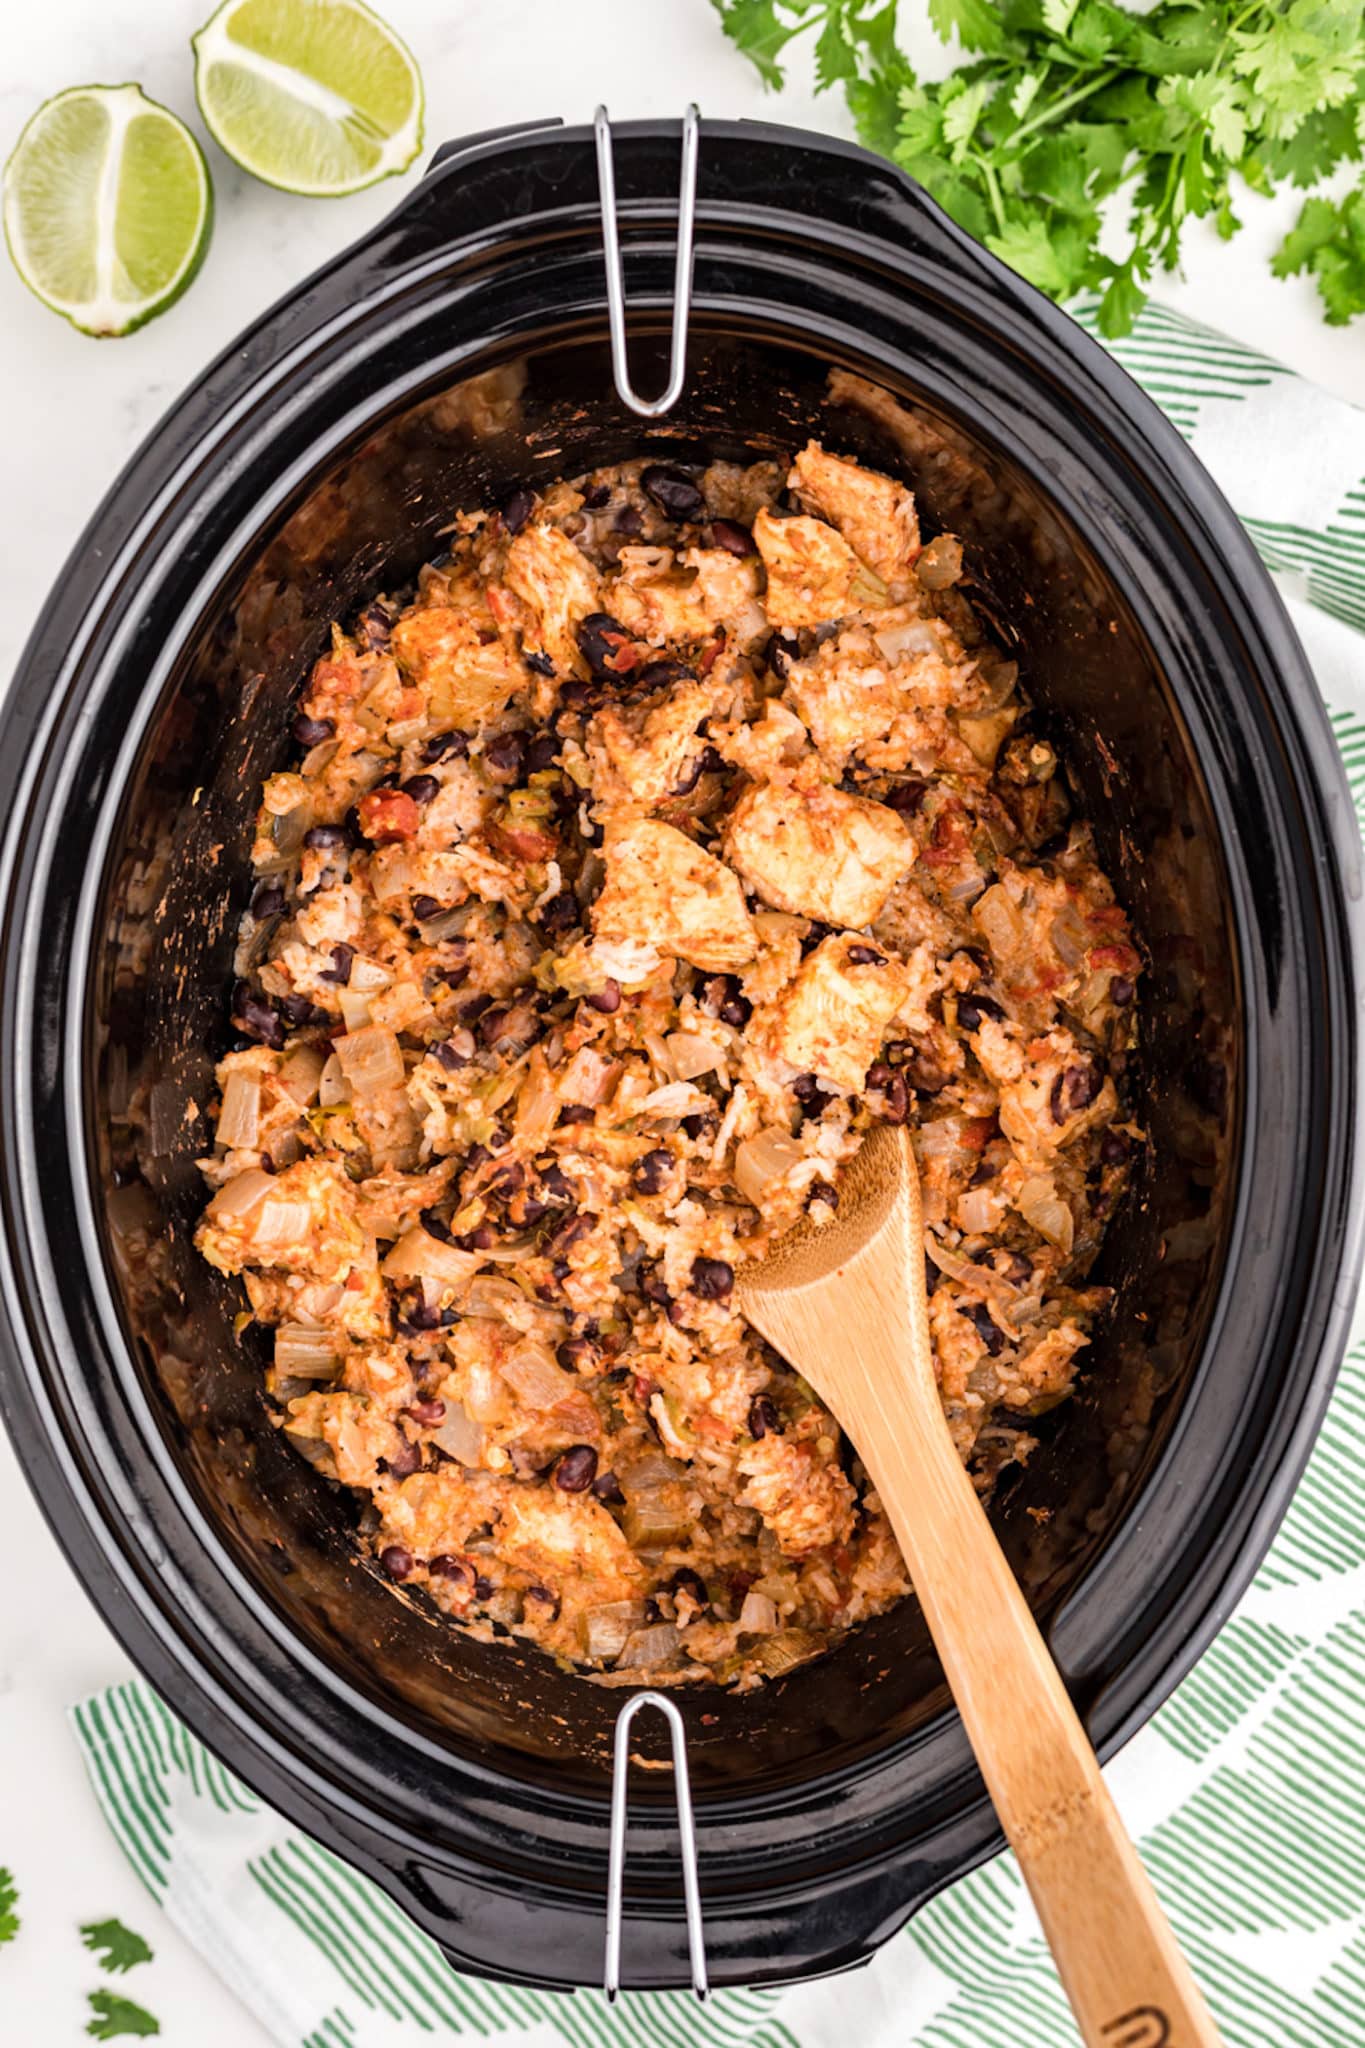 a crockpot with cooked chicken and rice.